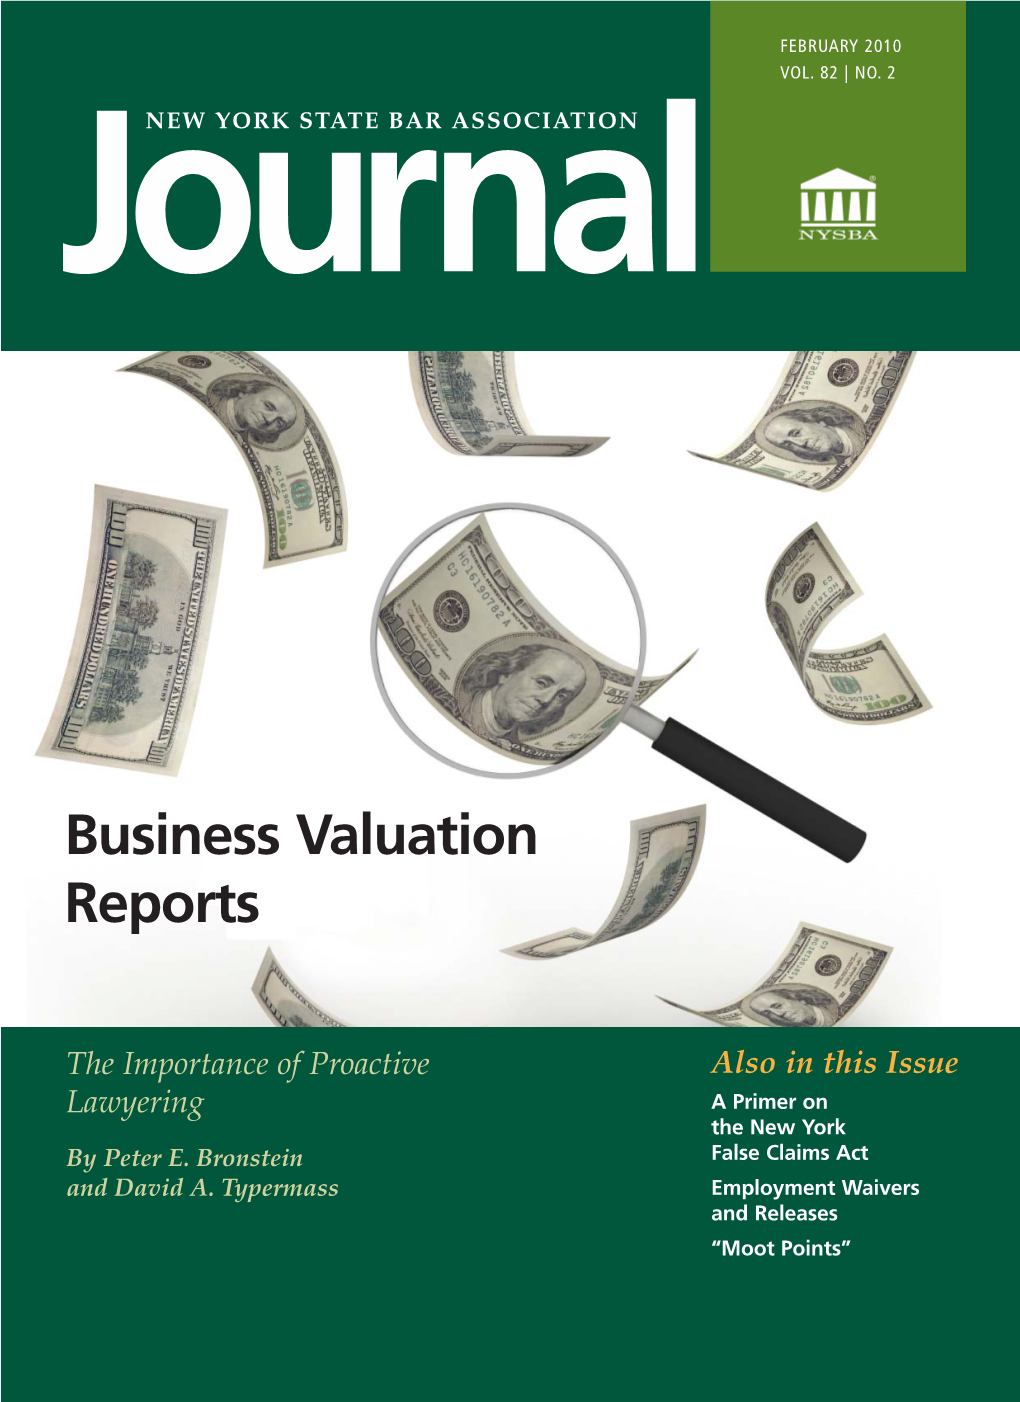 Business Valuation Reports